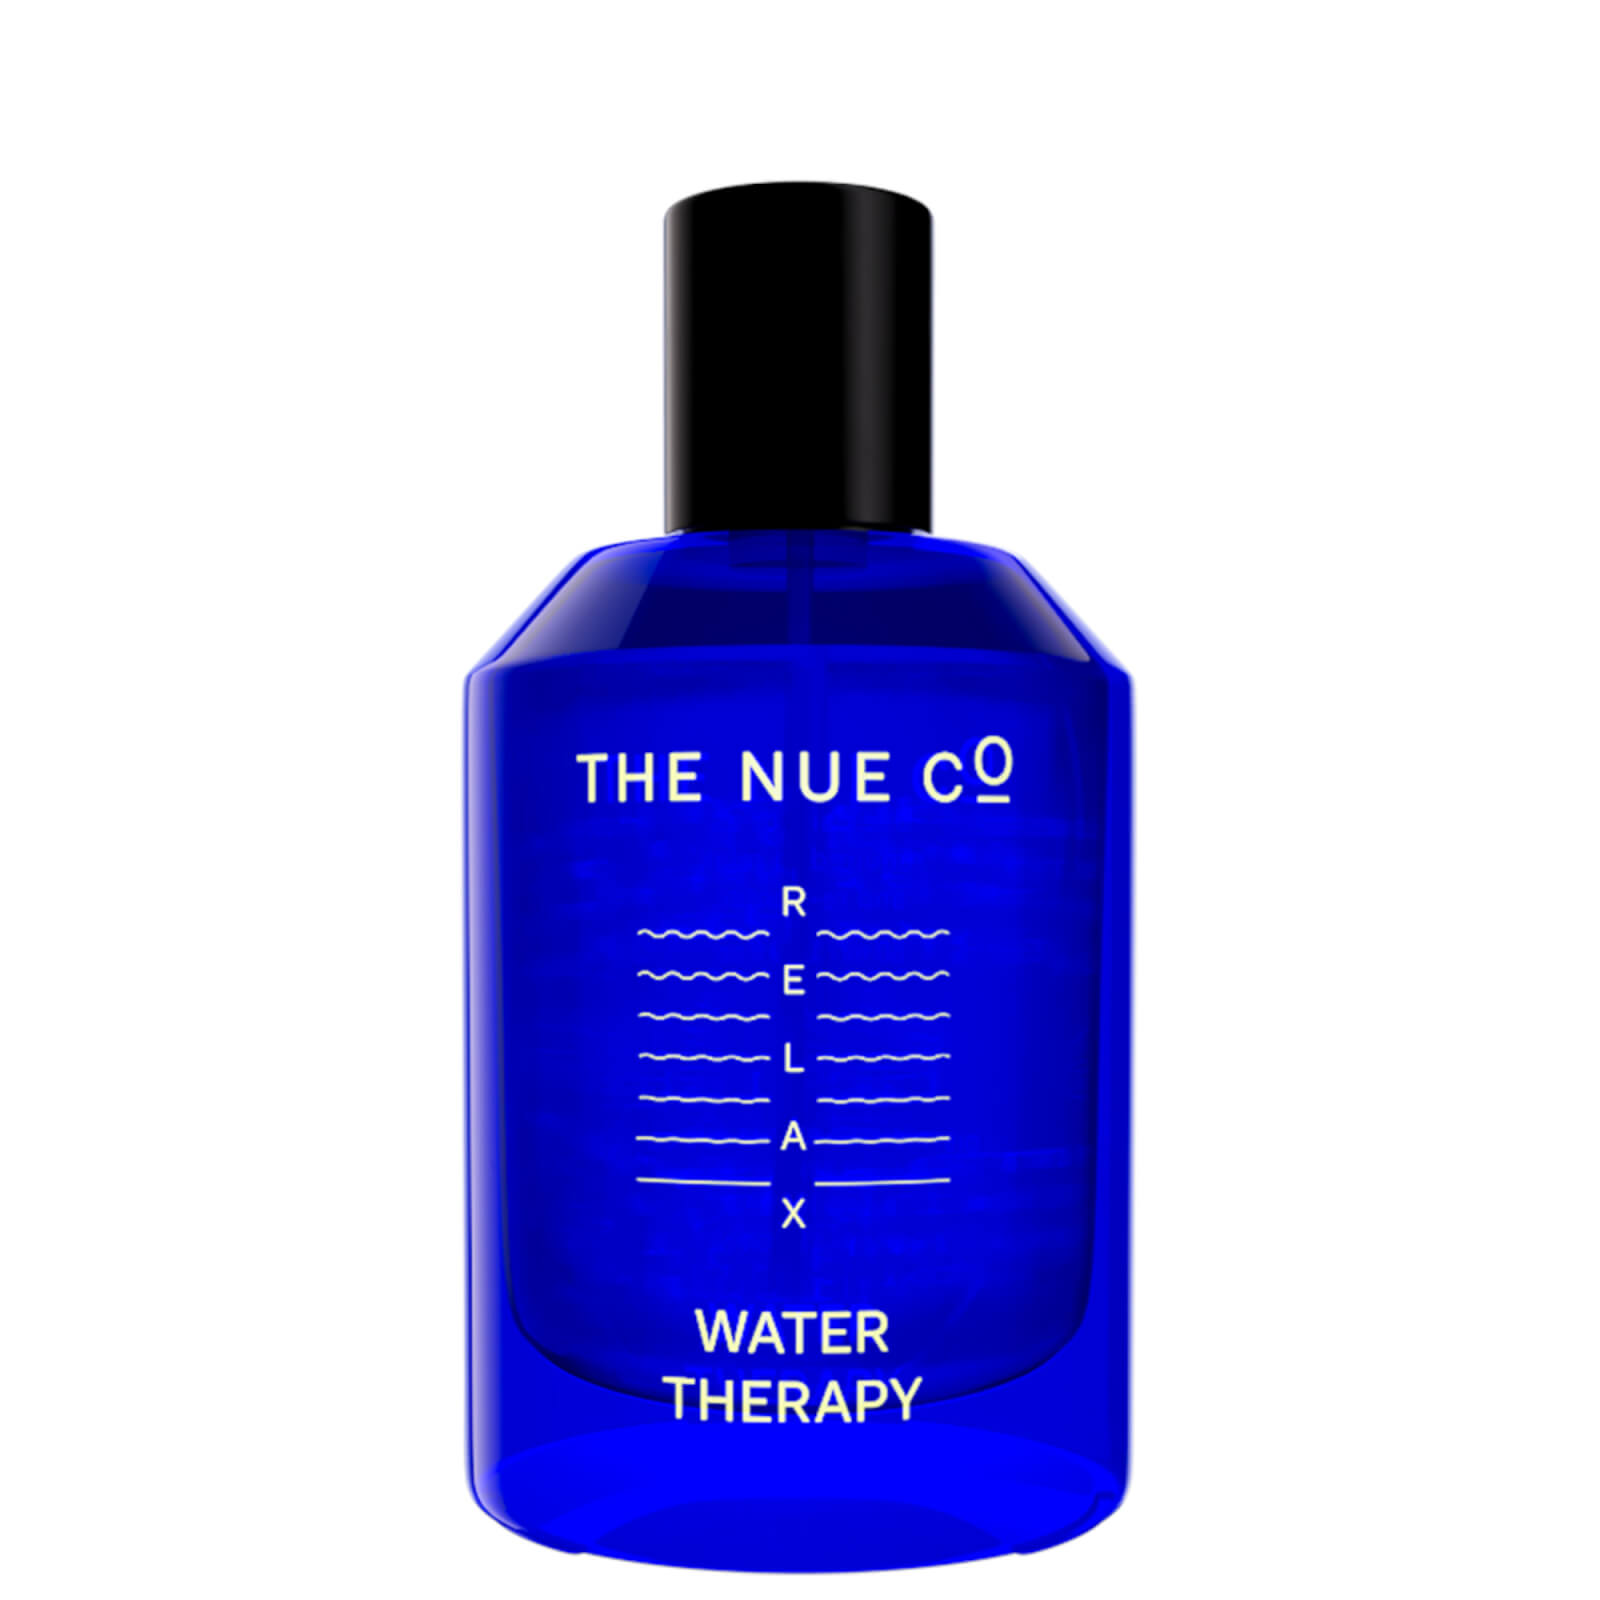 The Nue Co Water Therapy 50ml